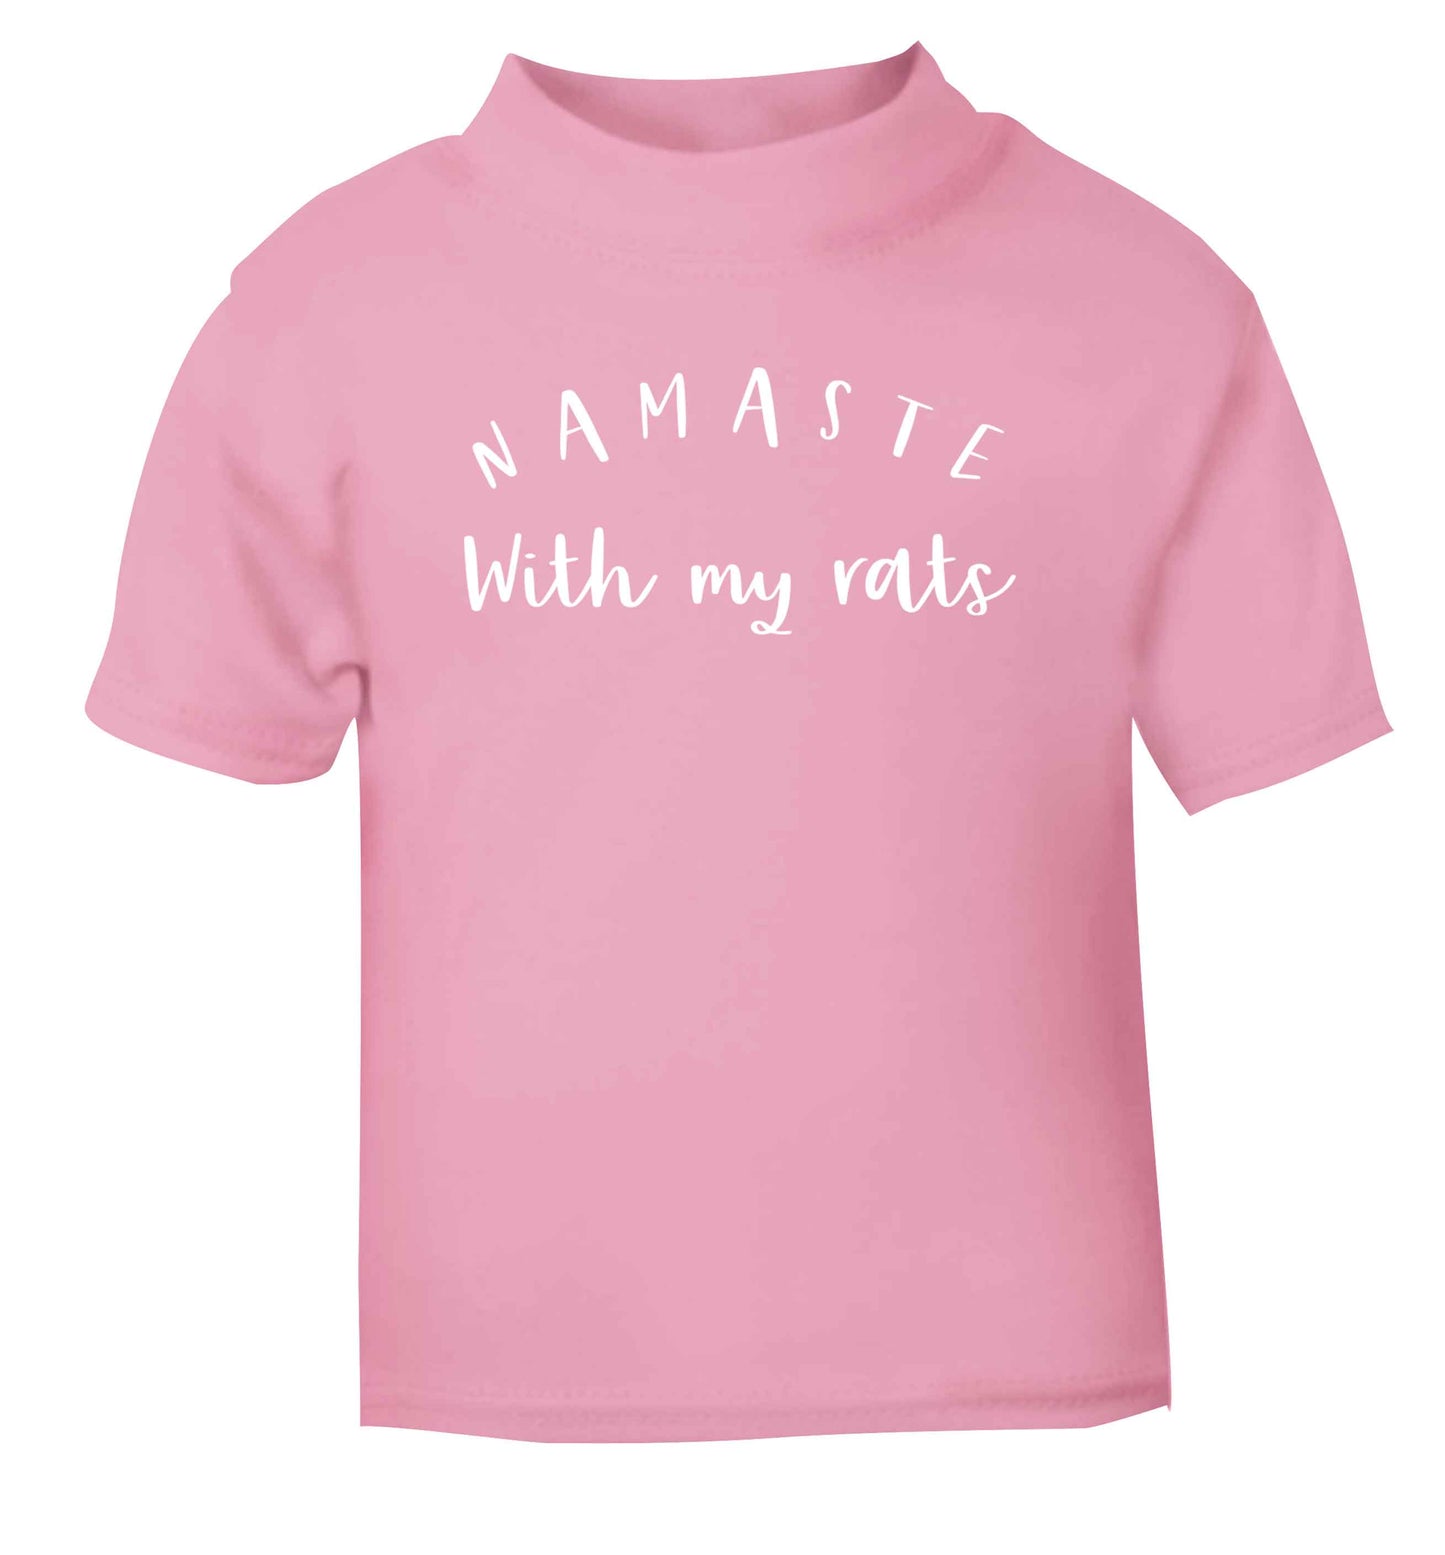 Namaste with my rats light pink Baby Toddler Tshirt 2 Years